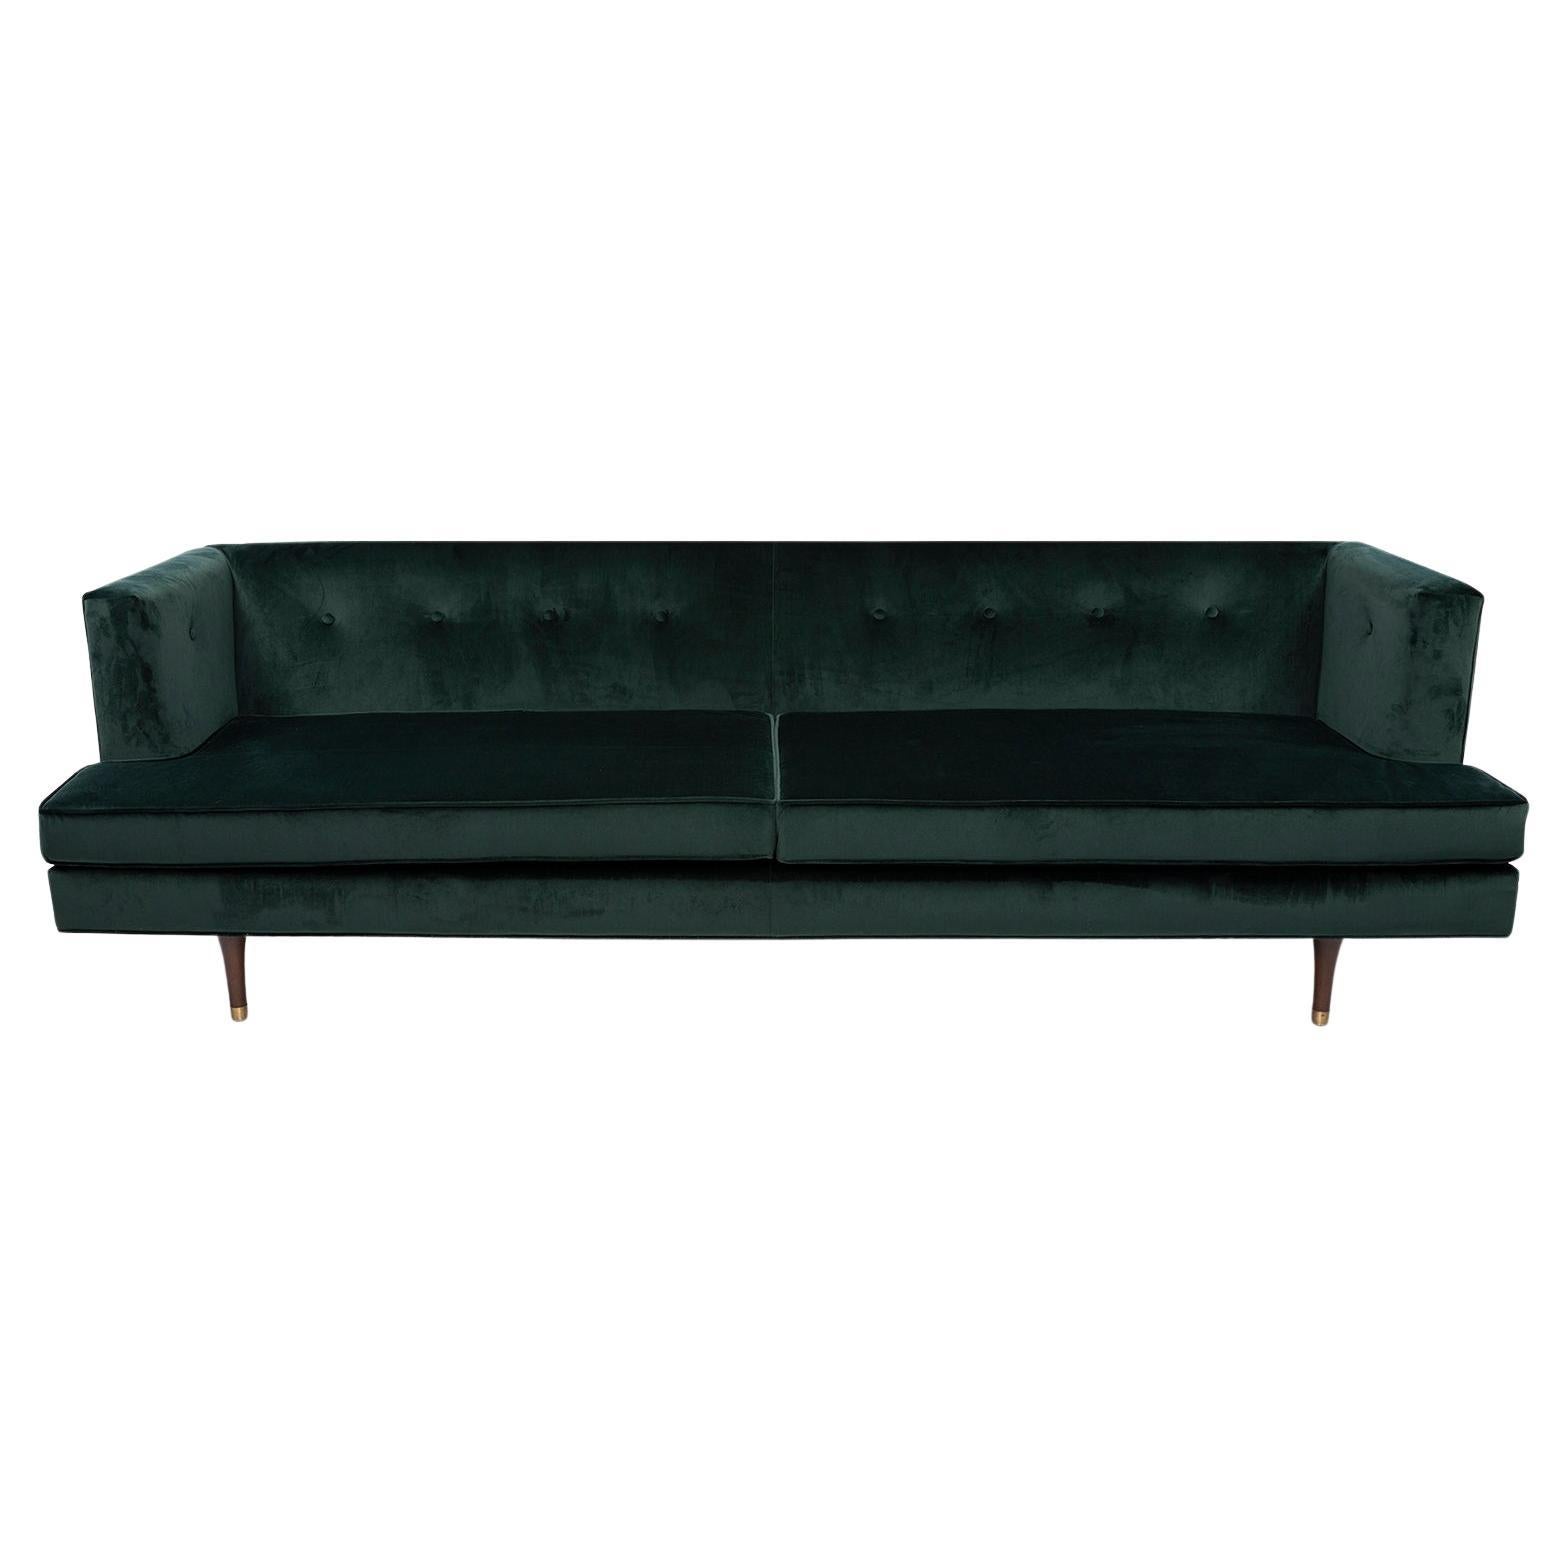 Edward Wormley for Dunbar sofa number 4908 circa early 1940s. This example has been masterfully upholstered in a wonderful dark emerald green mohair. This fabric melds seamlessly with the newly finished solid walnut and brass legs. Excellent